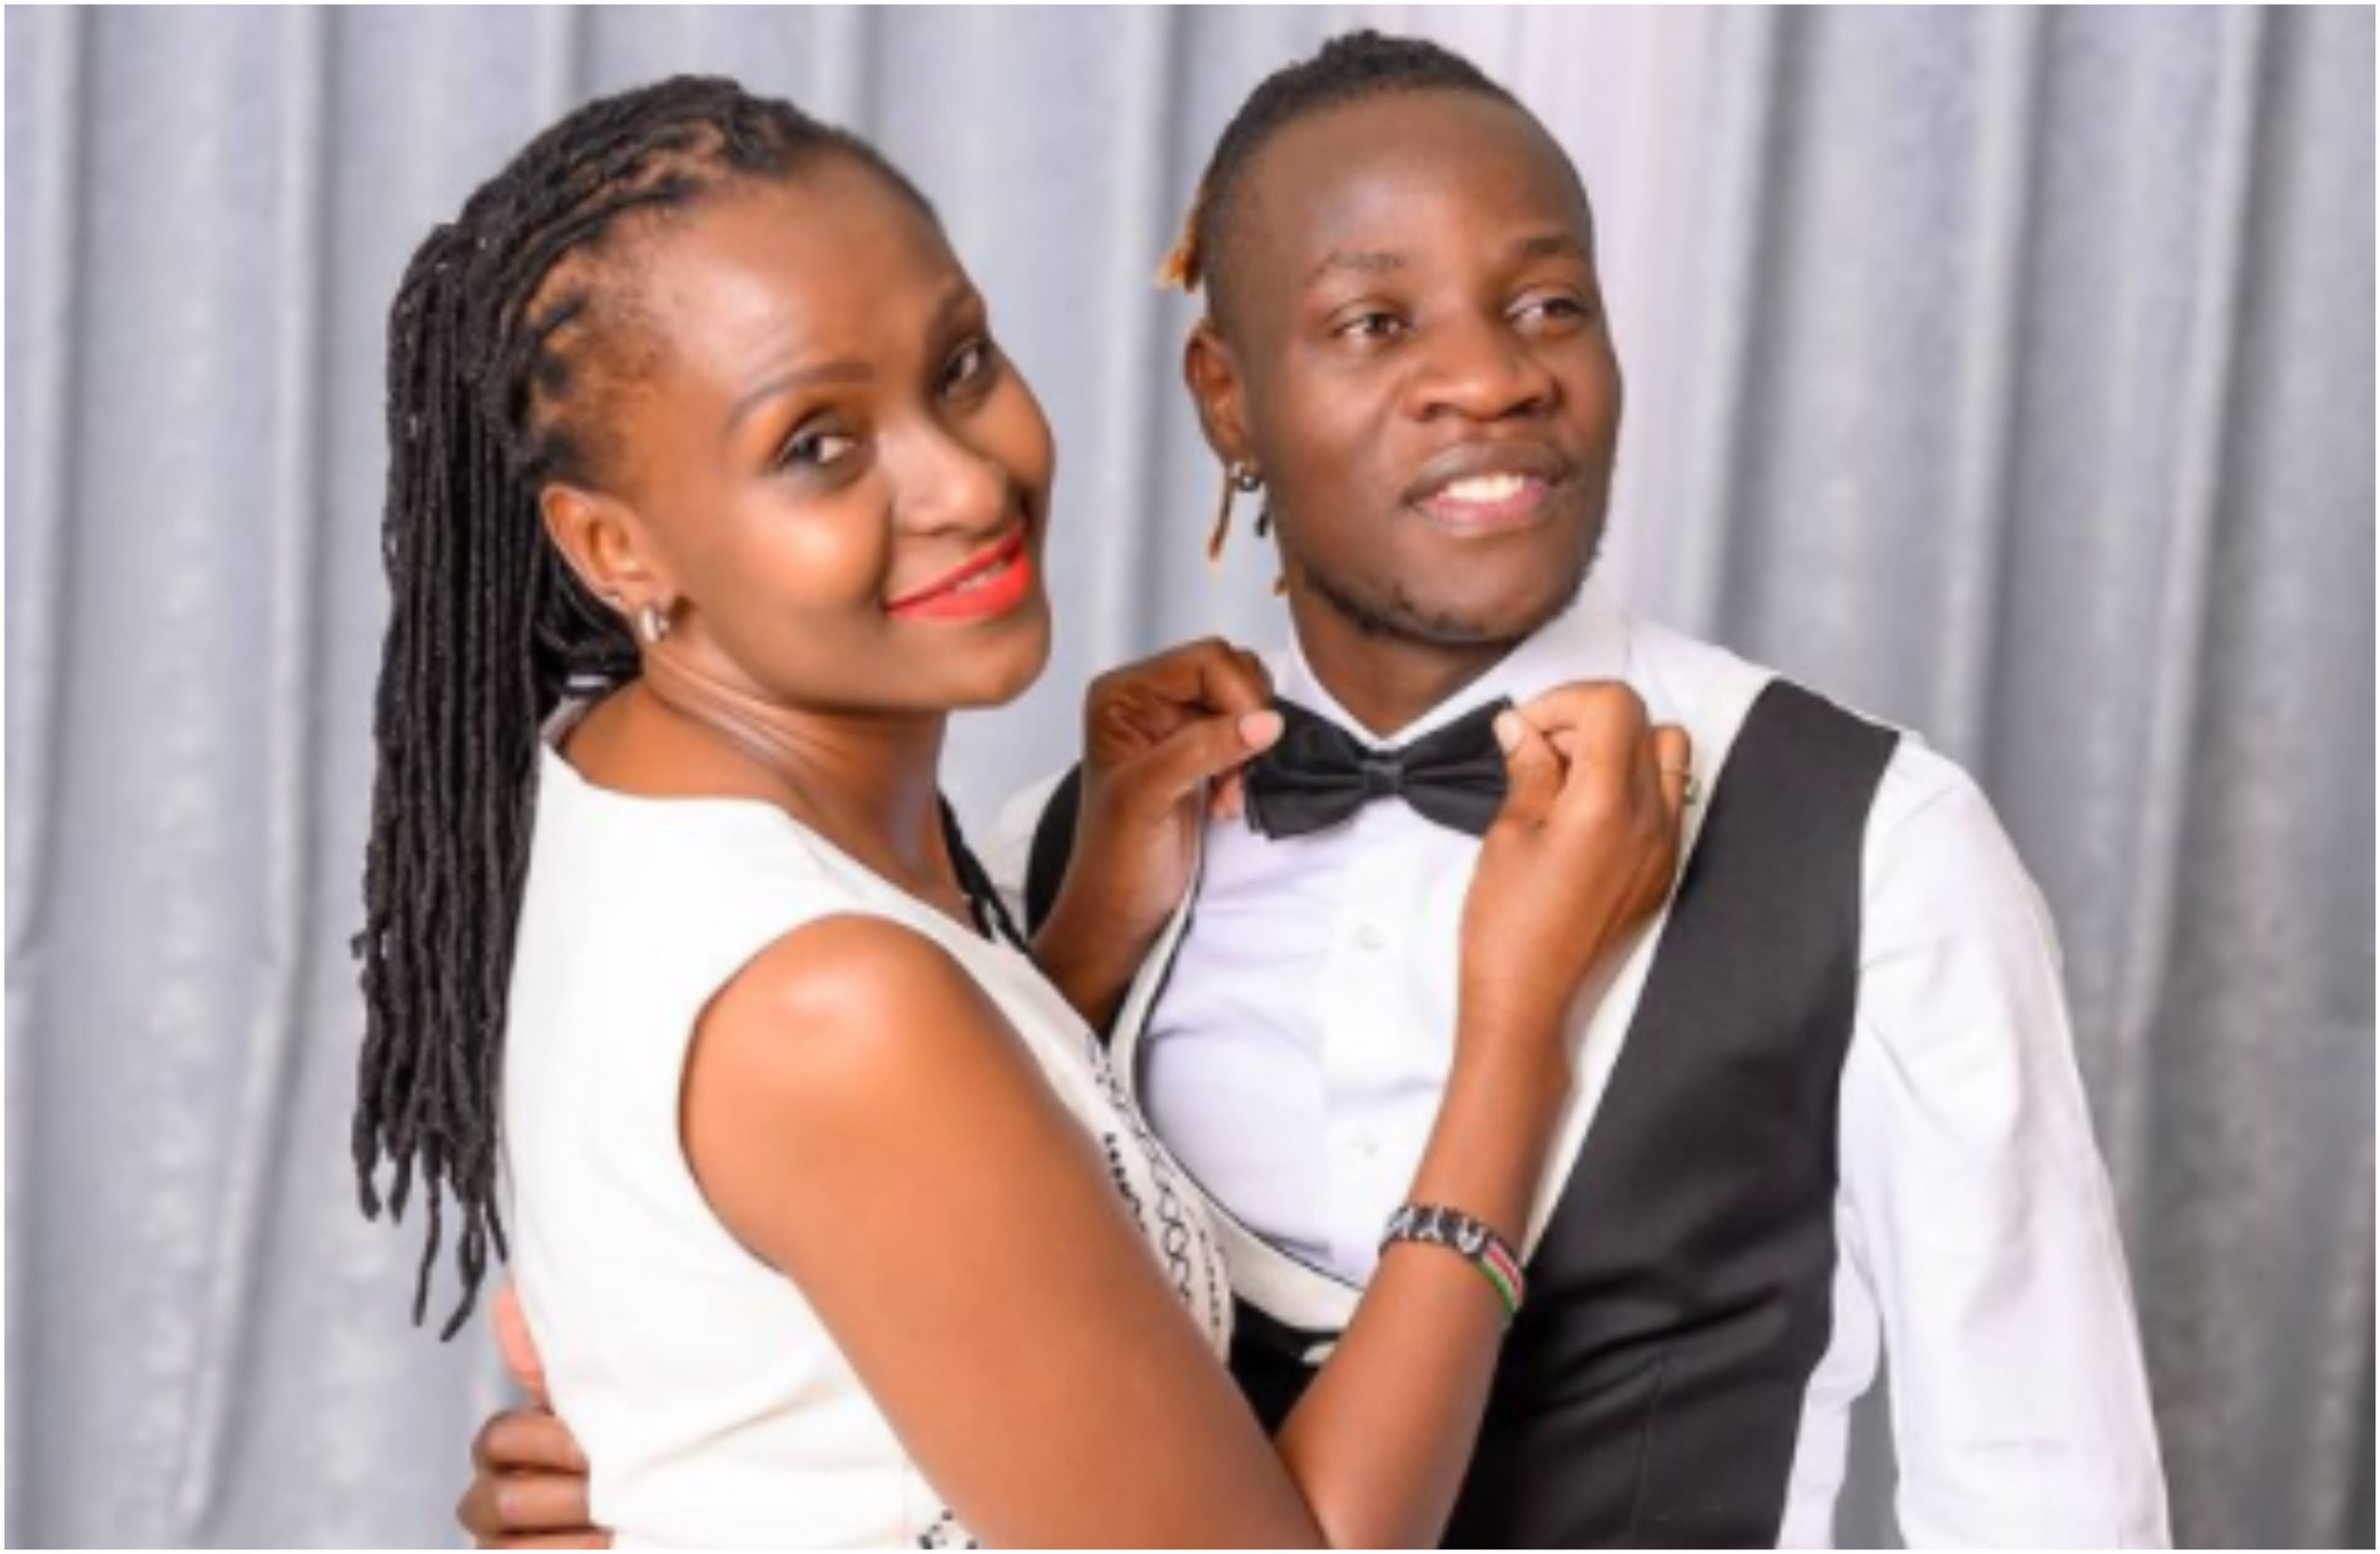 Kanairo: Mixed reactions after 32 year old Guardian Angel proposed to his 51 year old girlfriend